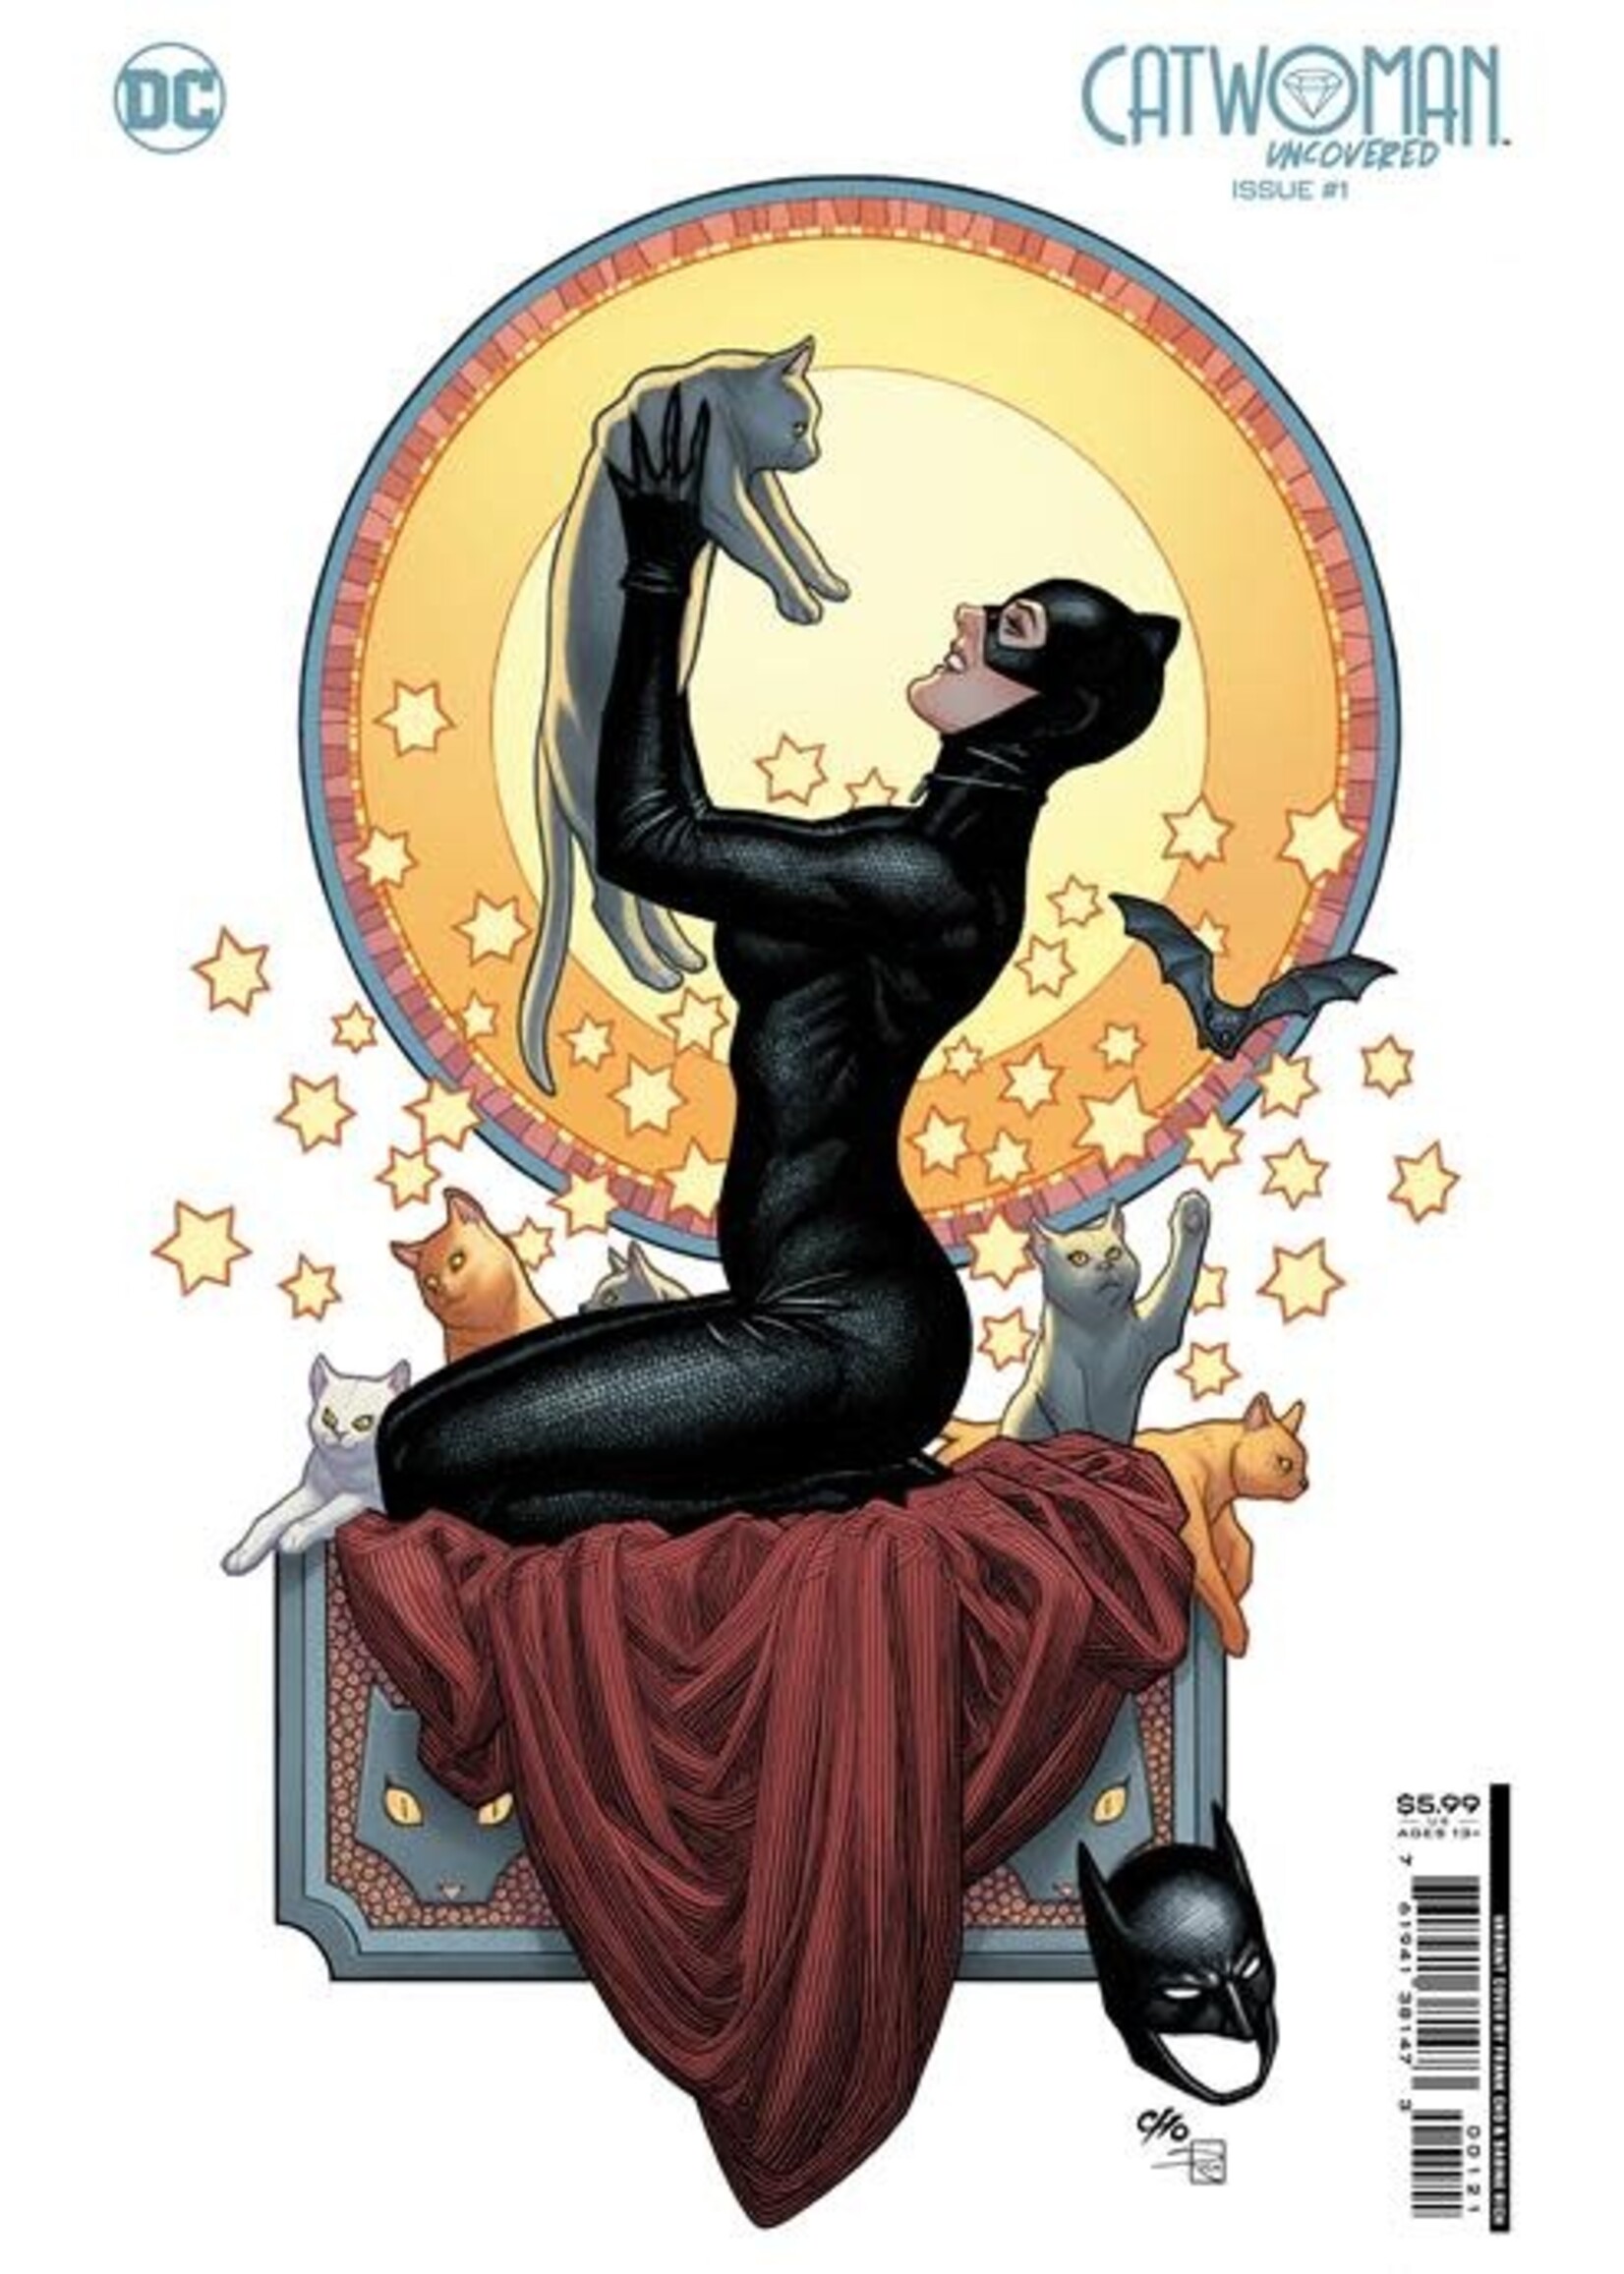 DC COMICS CATWOMAN UNCOVERED #1 CHO